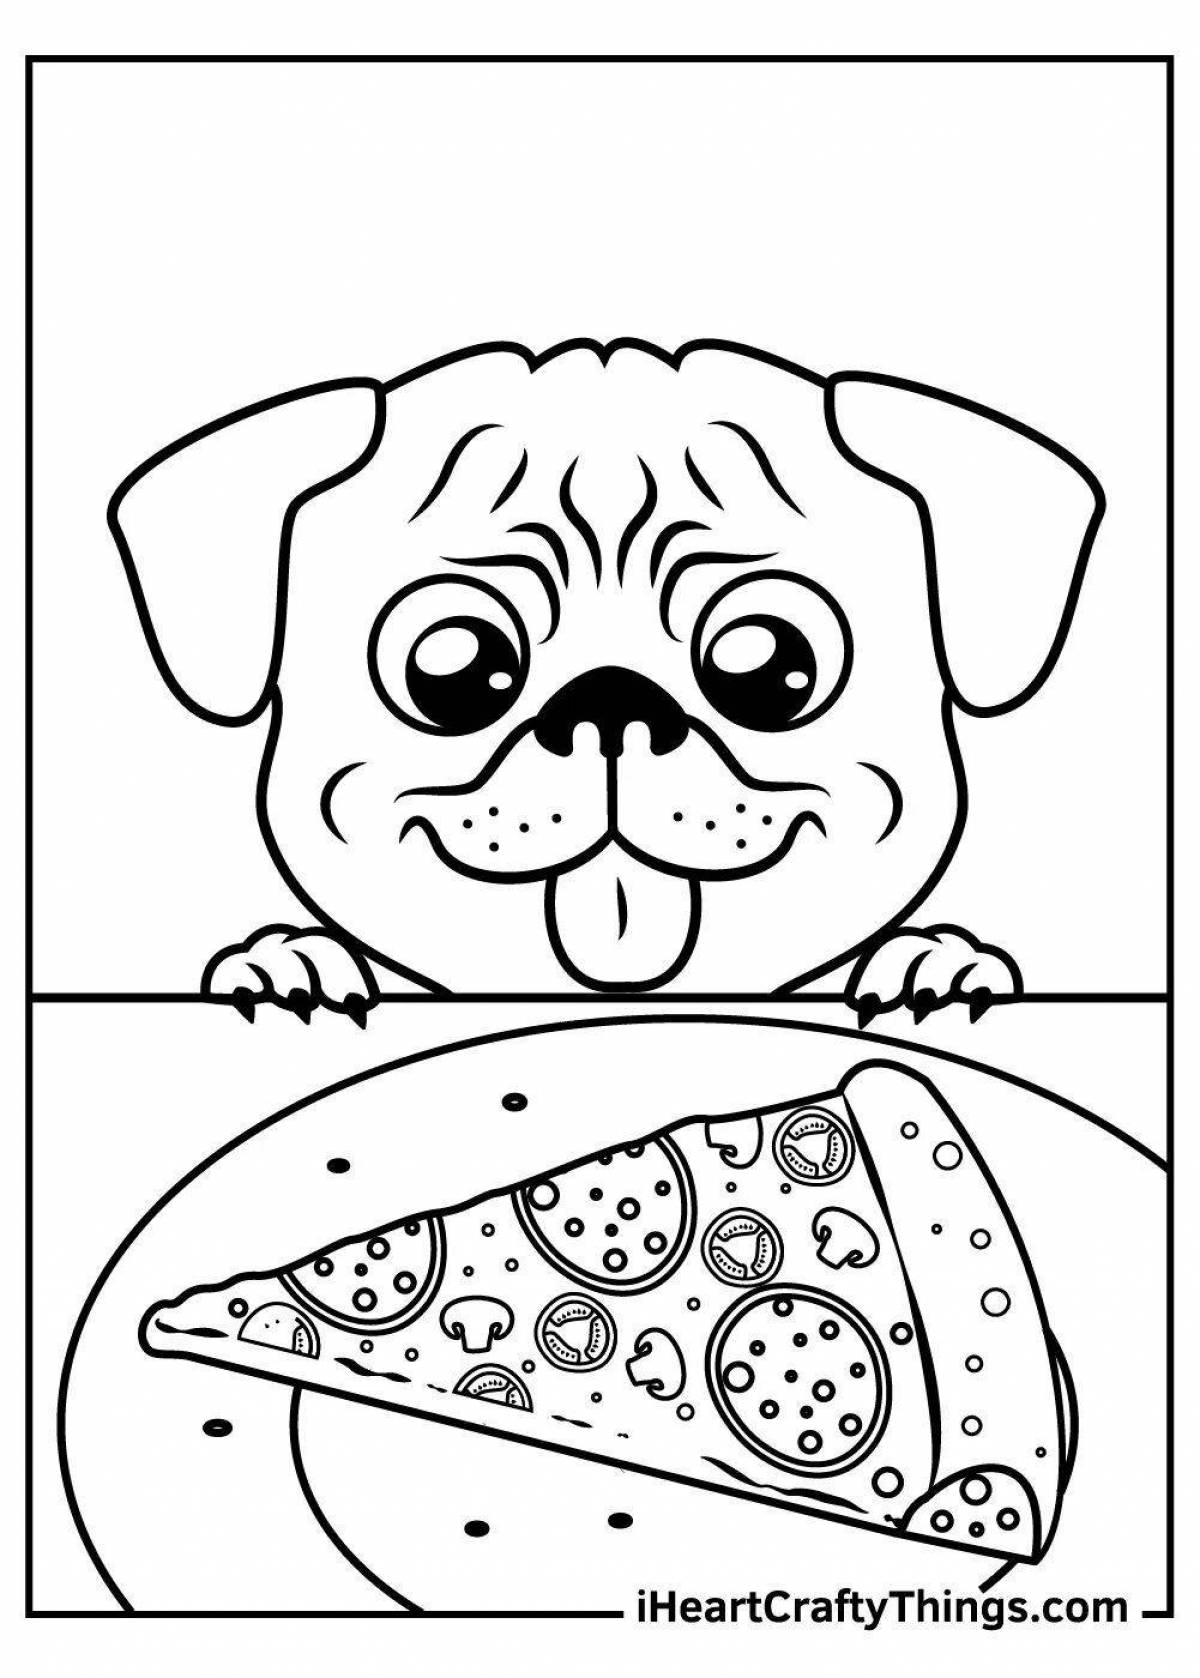 Affectionate Pug Coloring Page